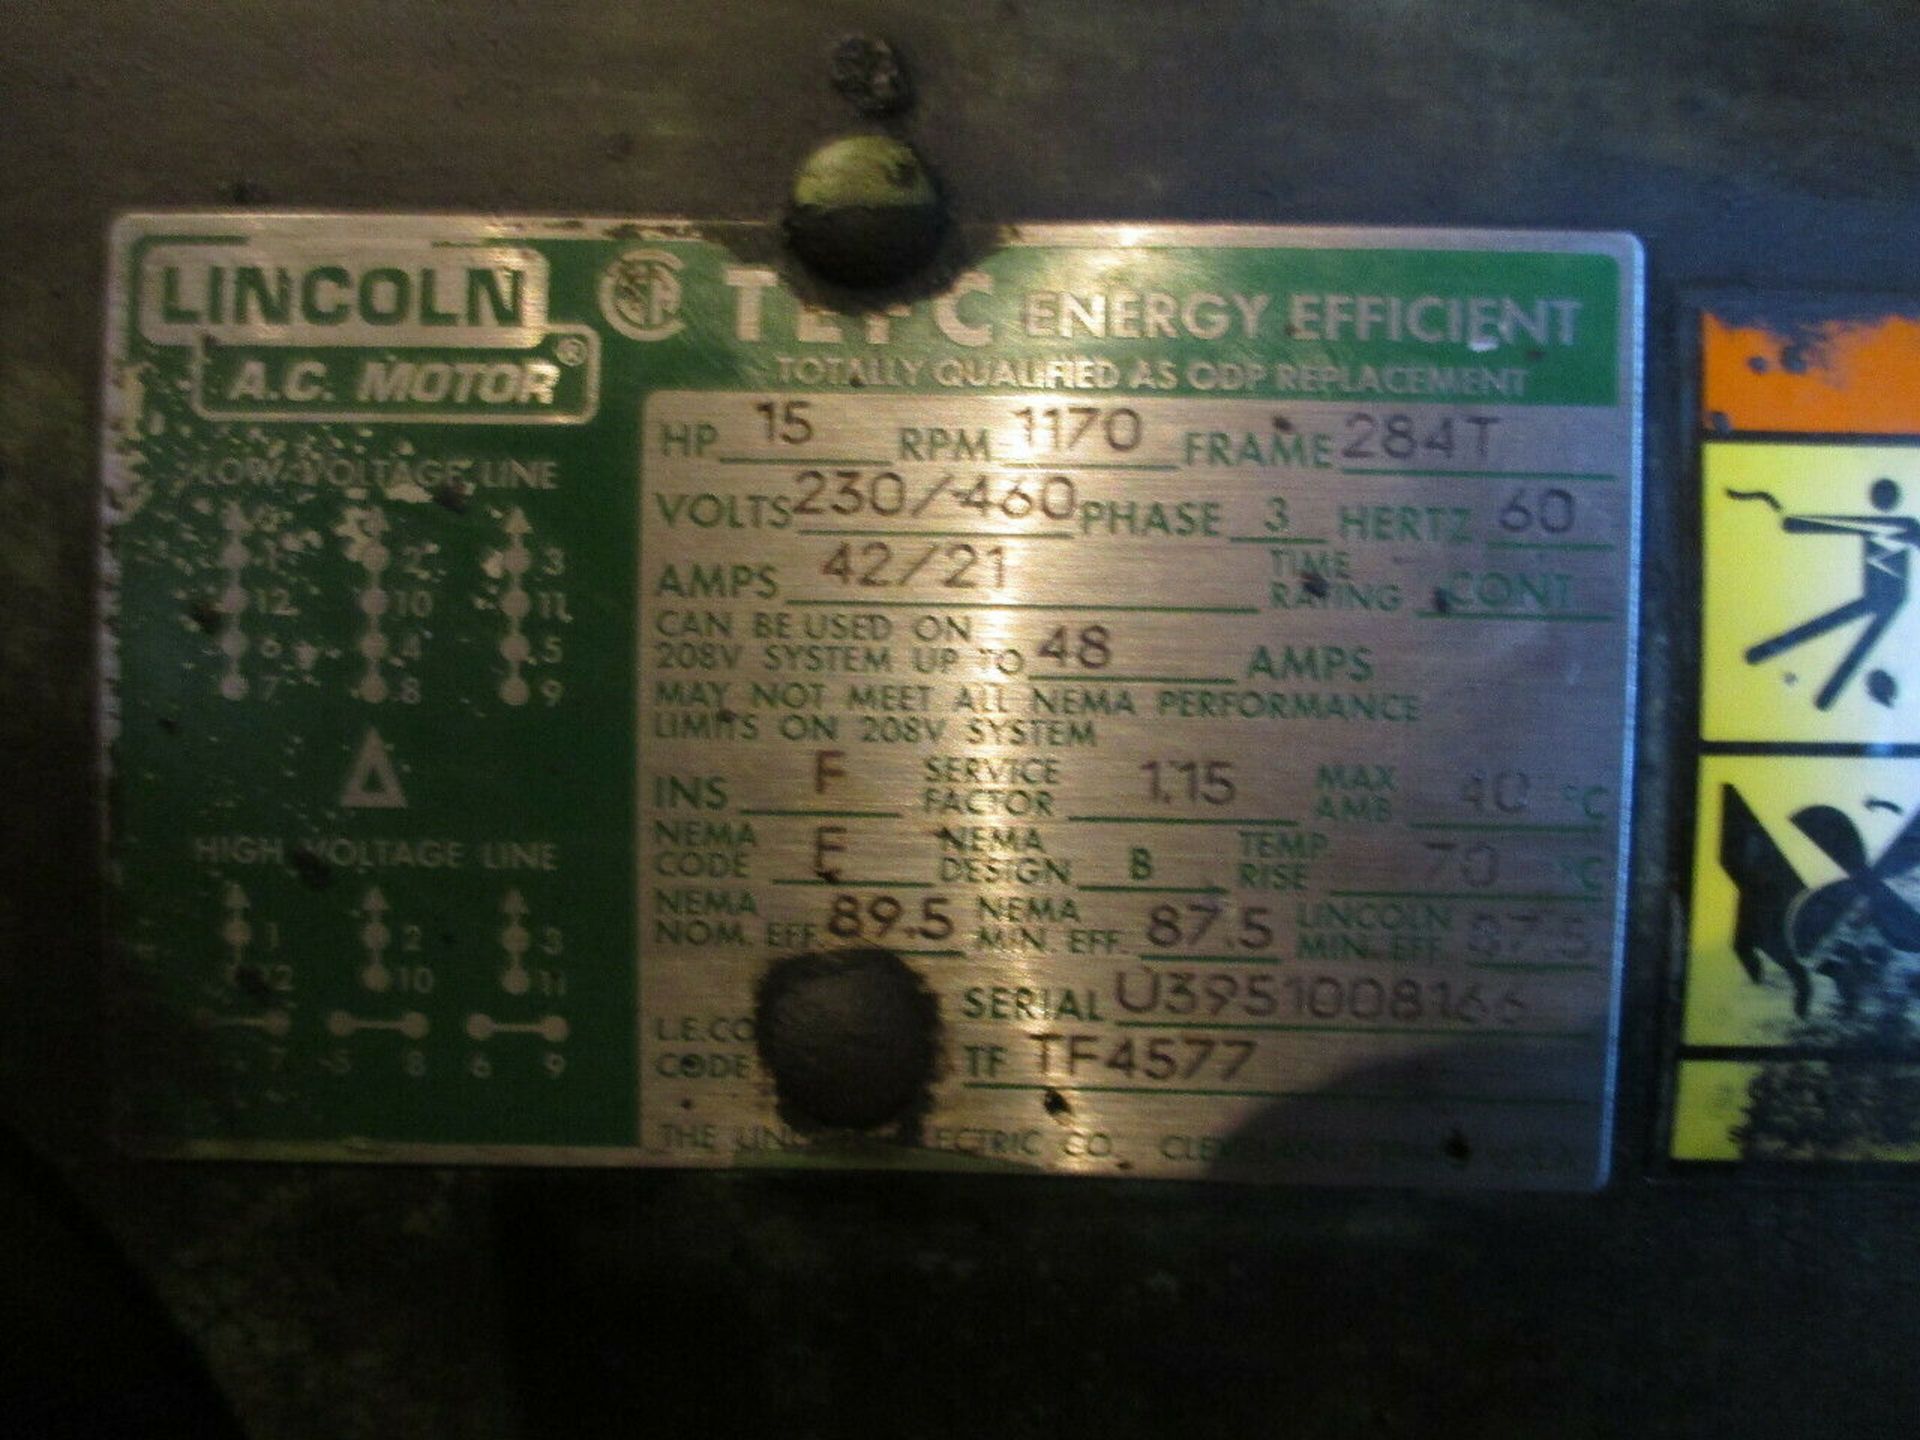 Lincoln TEFC 15HP A.C. Motor - Image 4 of 4